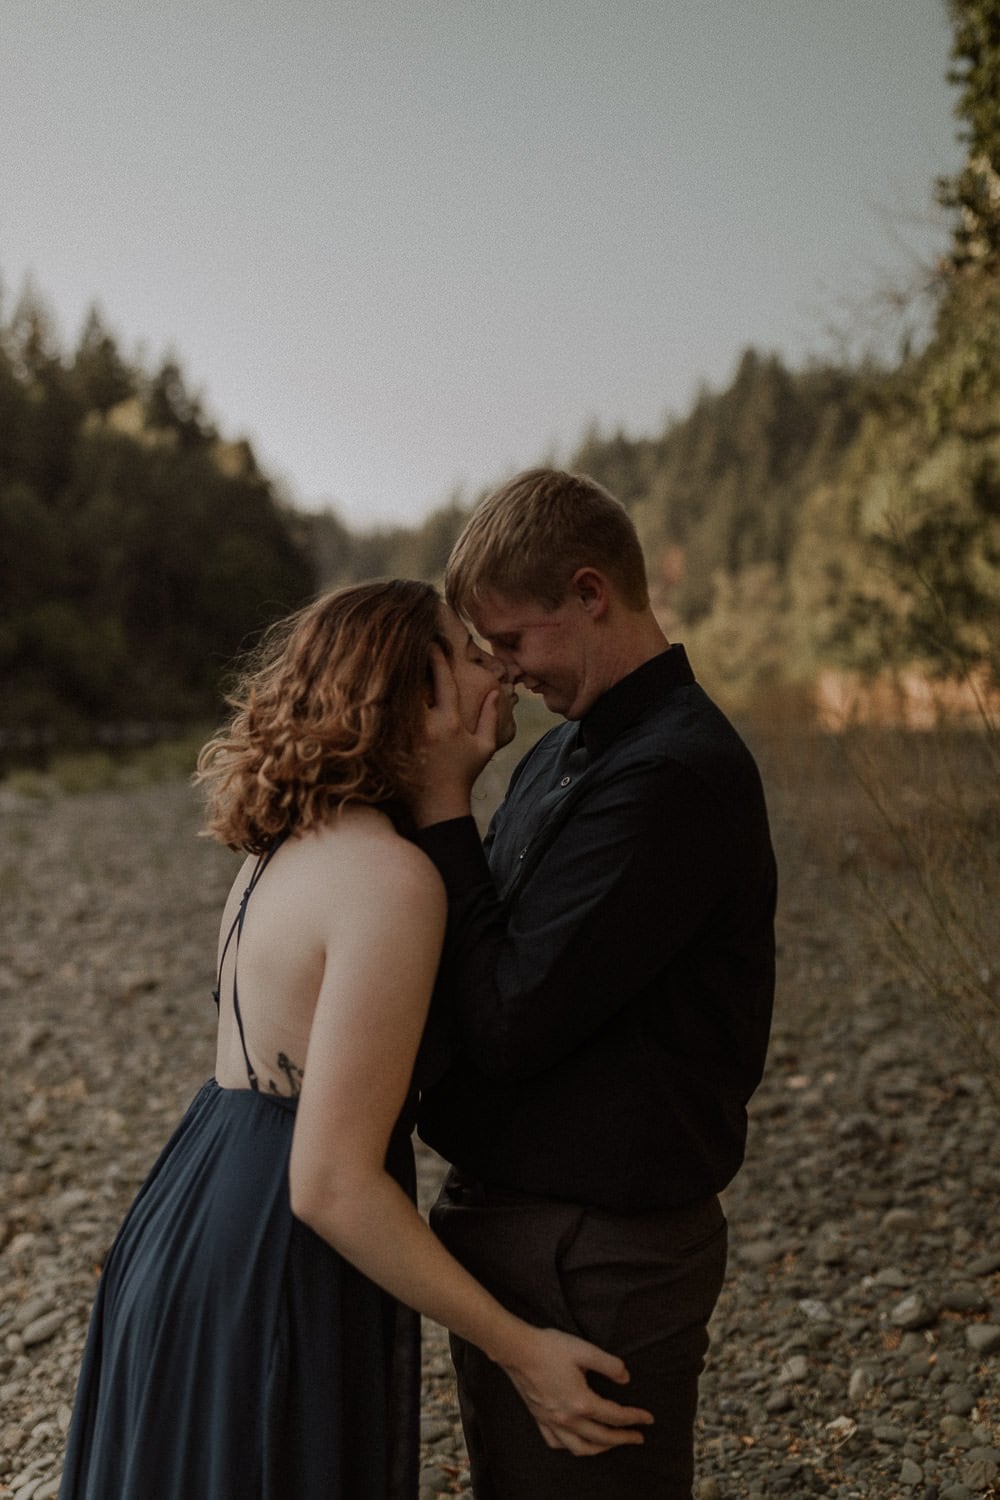 Moody elopement in the red woods forest in Northern California. Bride wears a navy blue elopement dress and is snuggling close to her partner by the river